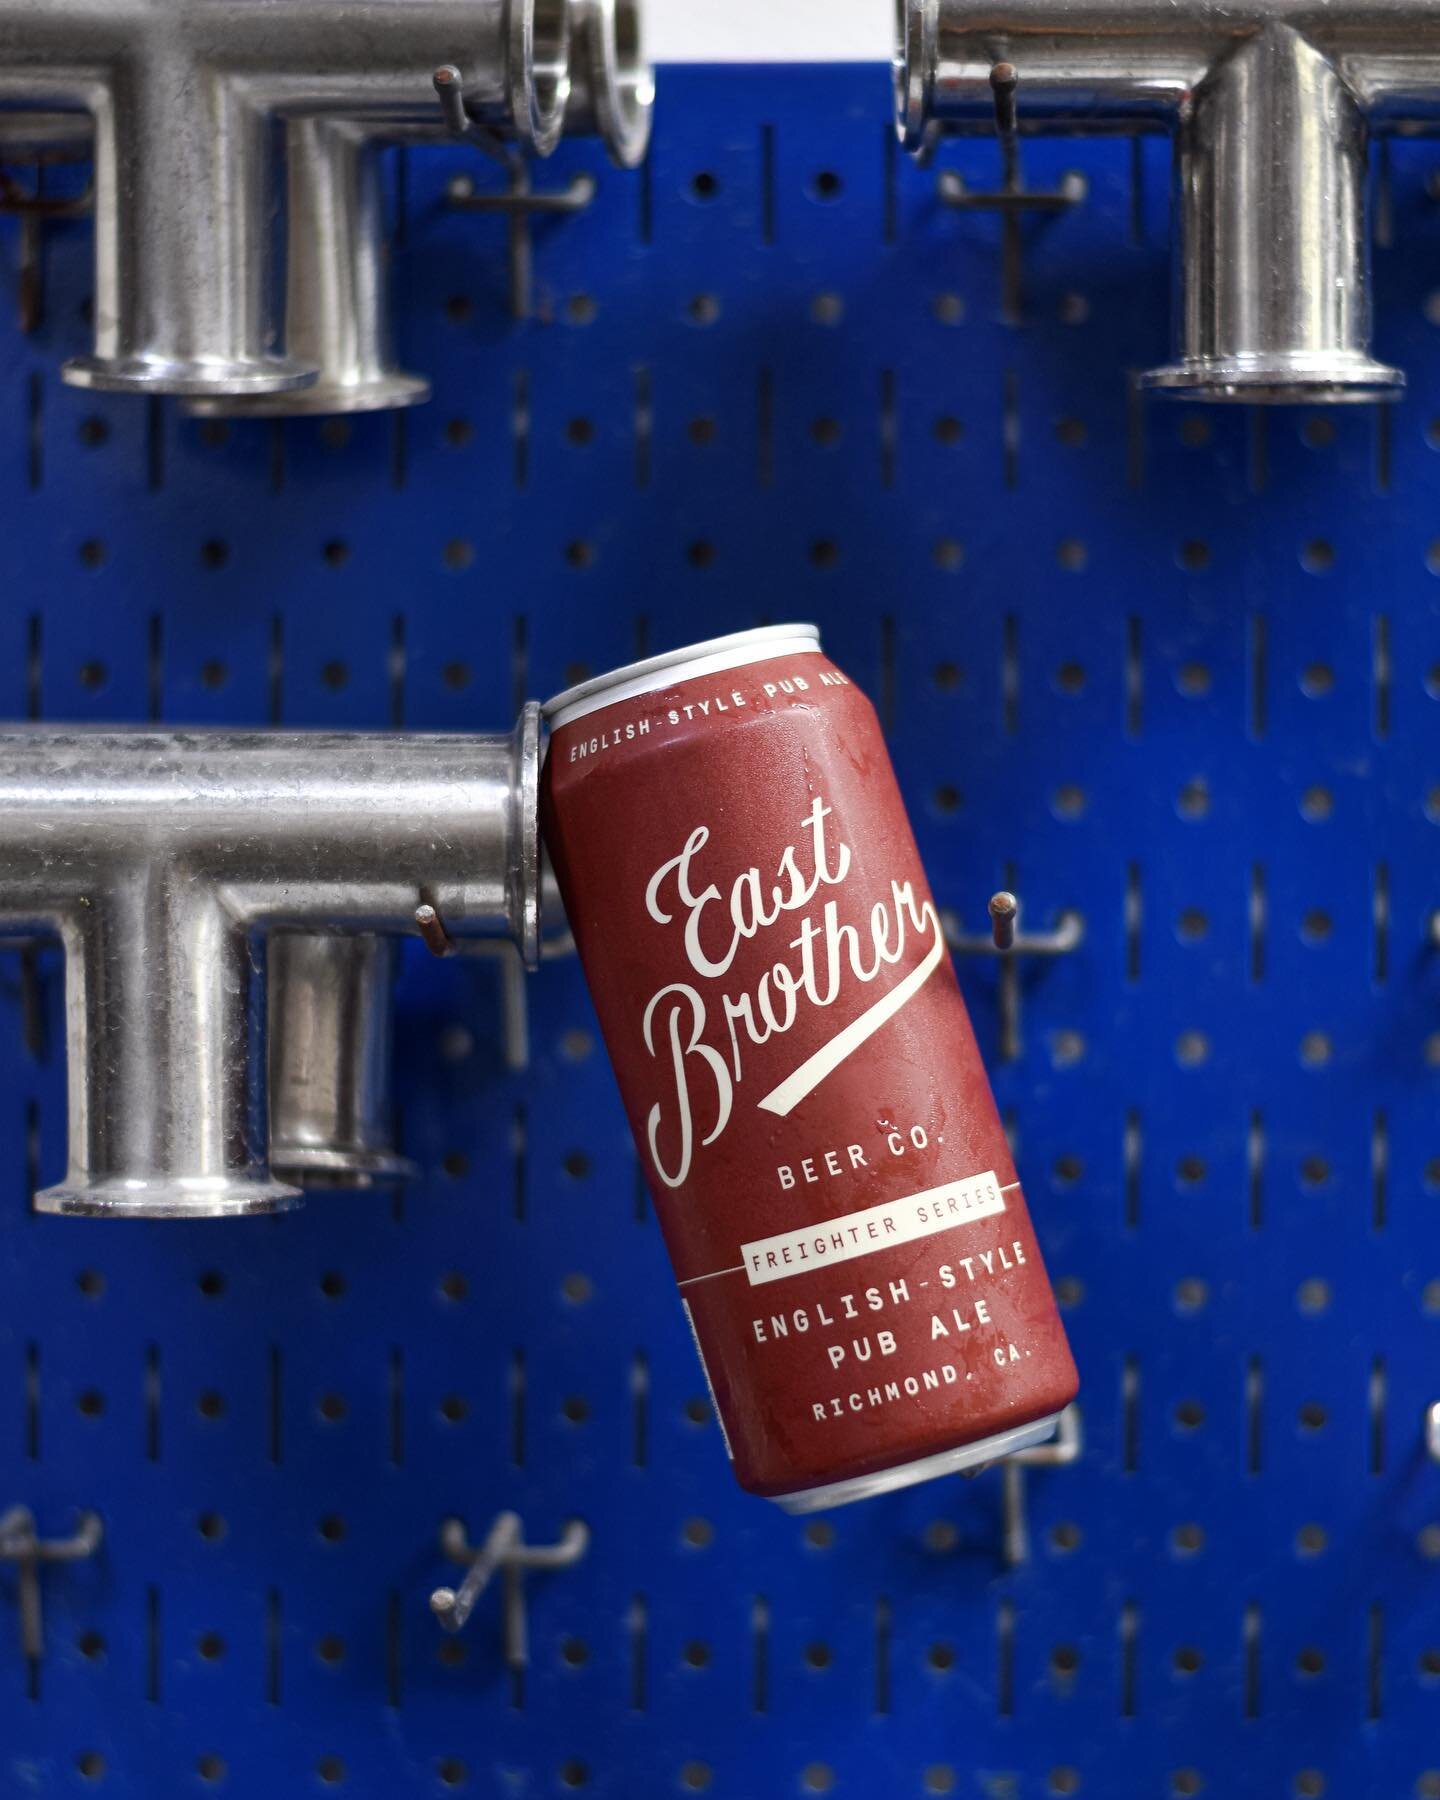 Just a few weeks in and our newest creation, the English-Style Pub Ale, is already making waves!

Inspired by the deep-rooted traditions of old English taverns, East Brother Beer Co. is proud to introduce a fresh take on a classic. With its balanced 